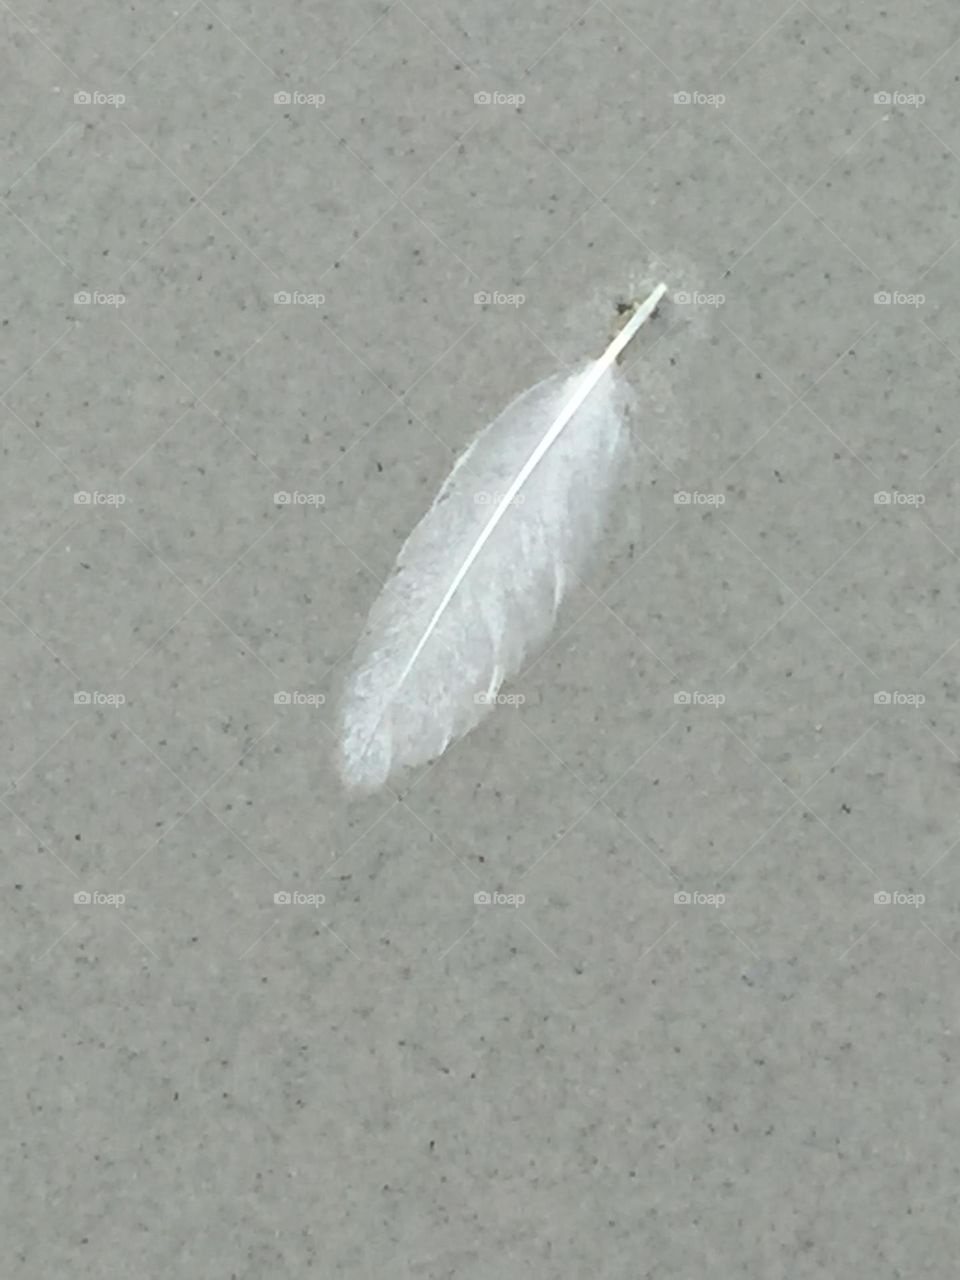 Seagull feather on sand